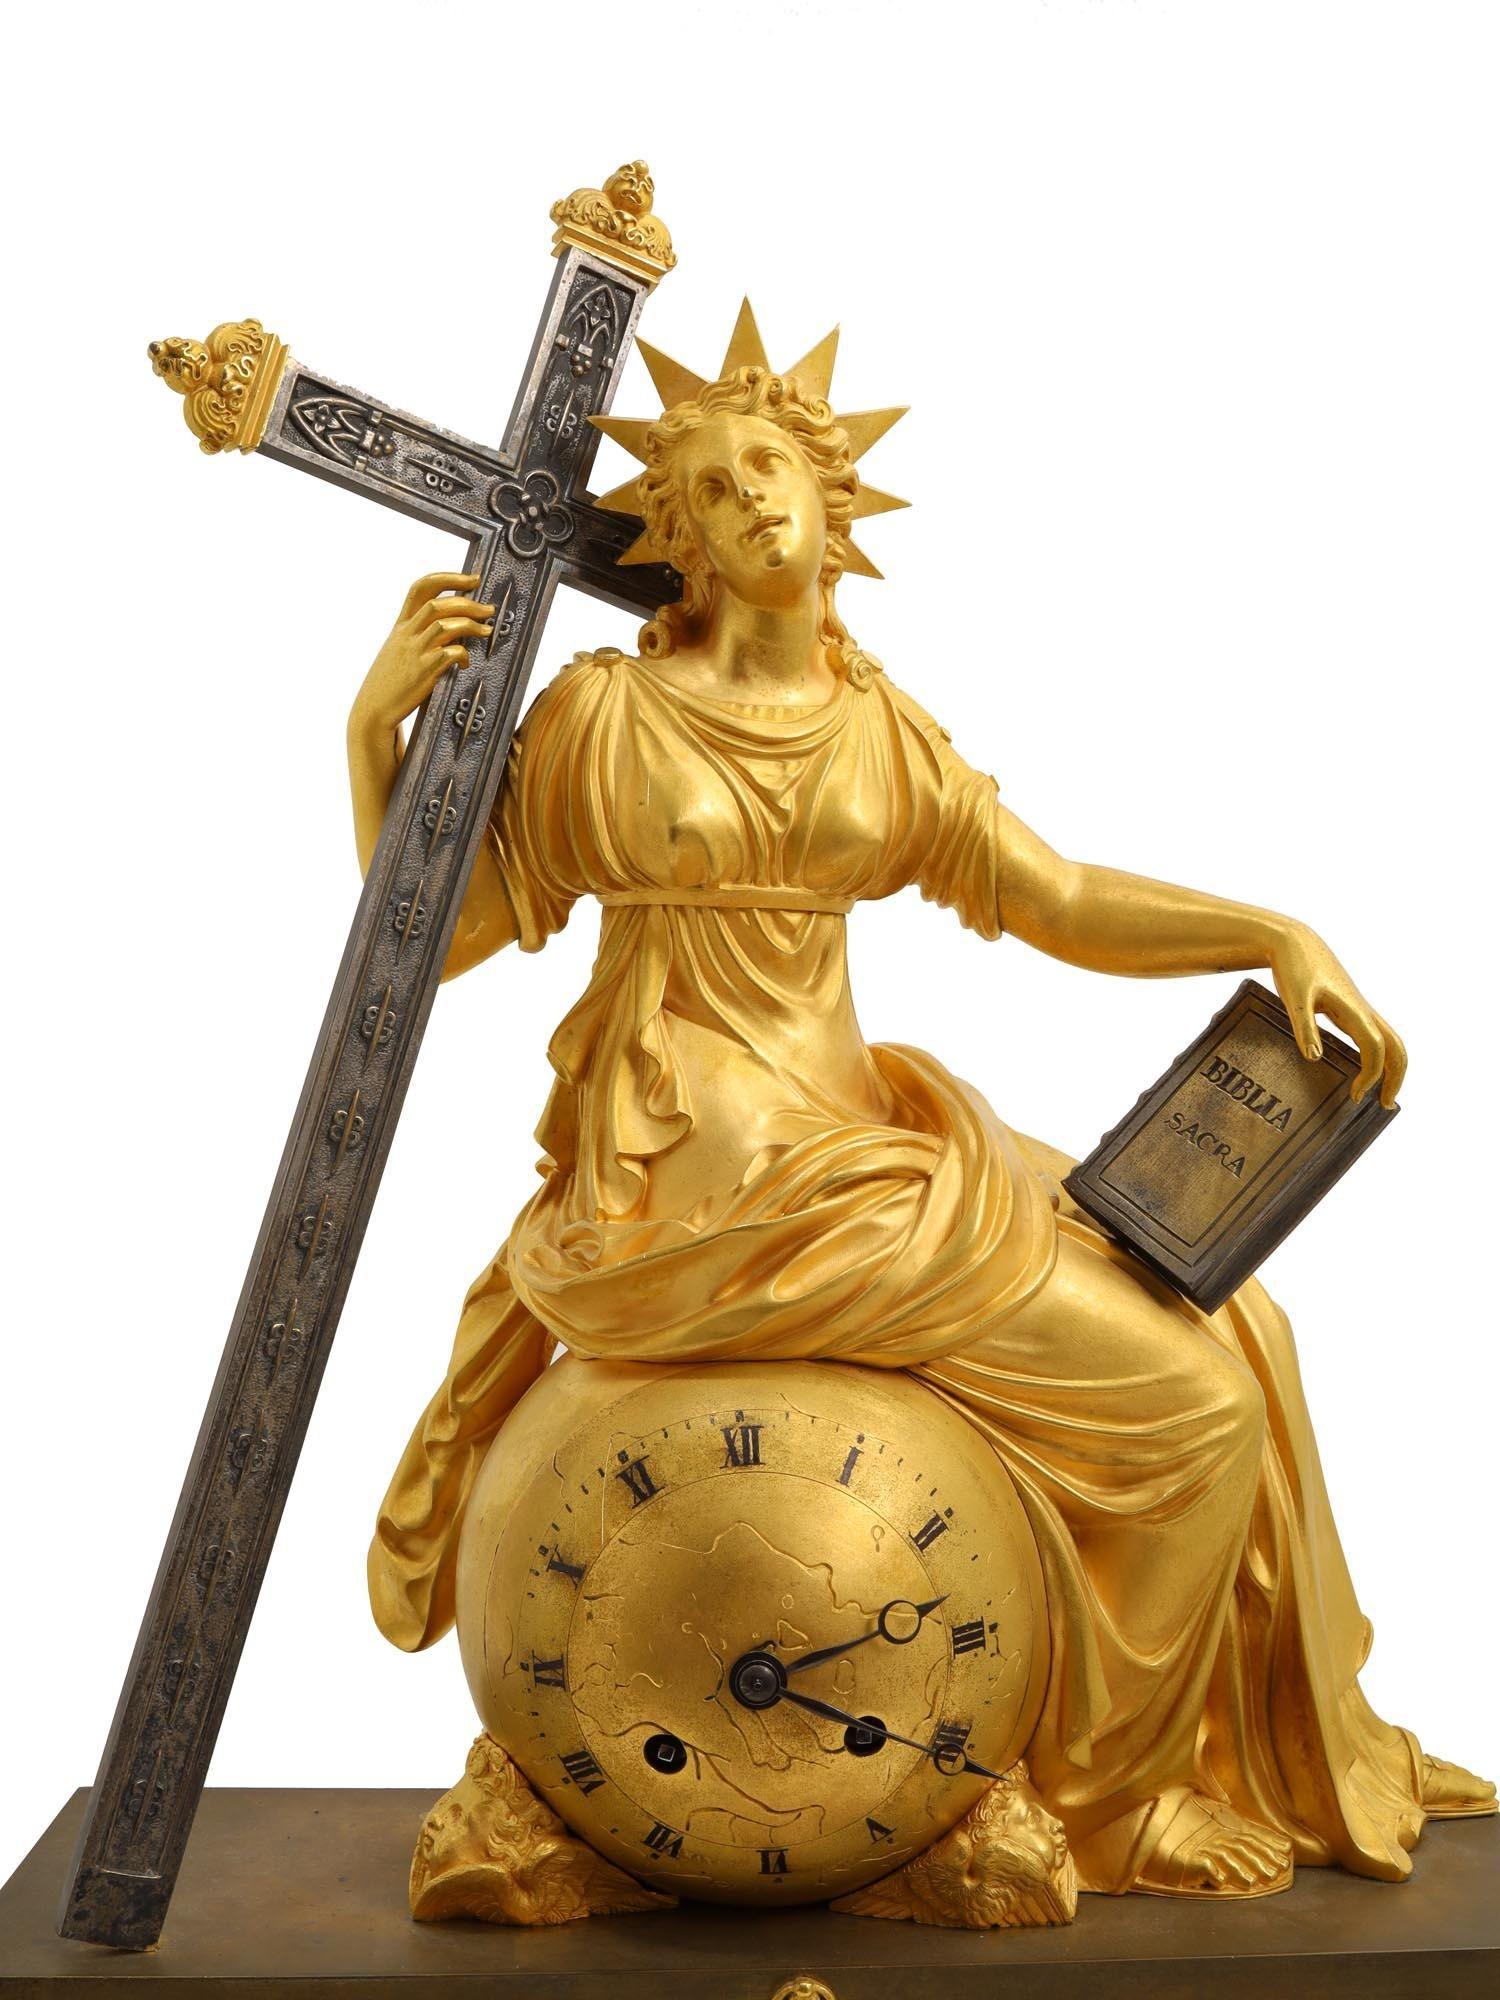 Our large French gilt and patinated bronze mantel clock dating from the second quarter of the nineteenth century  features the finest casting and gilded details.  It depicts Mary seated upon a sphere representing the globe, supporting a large cross